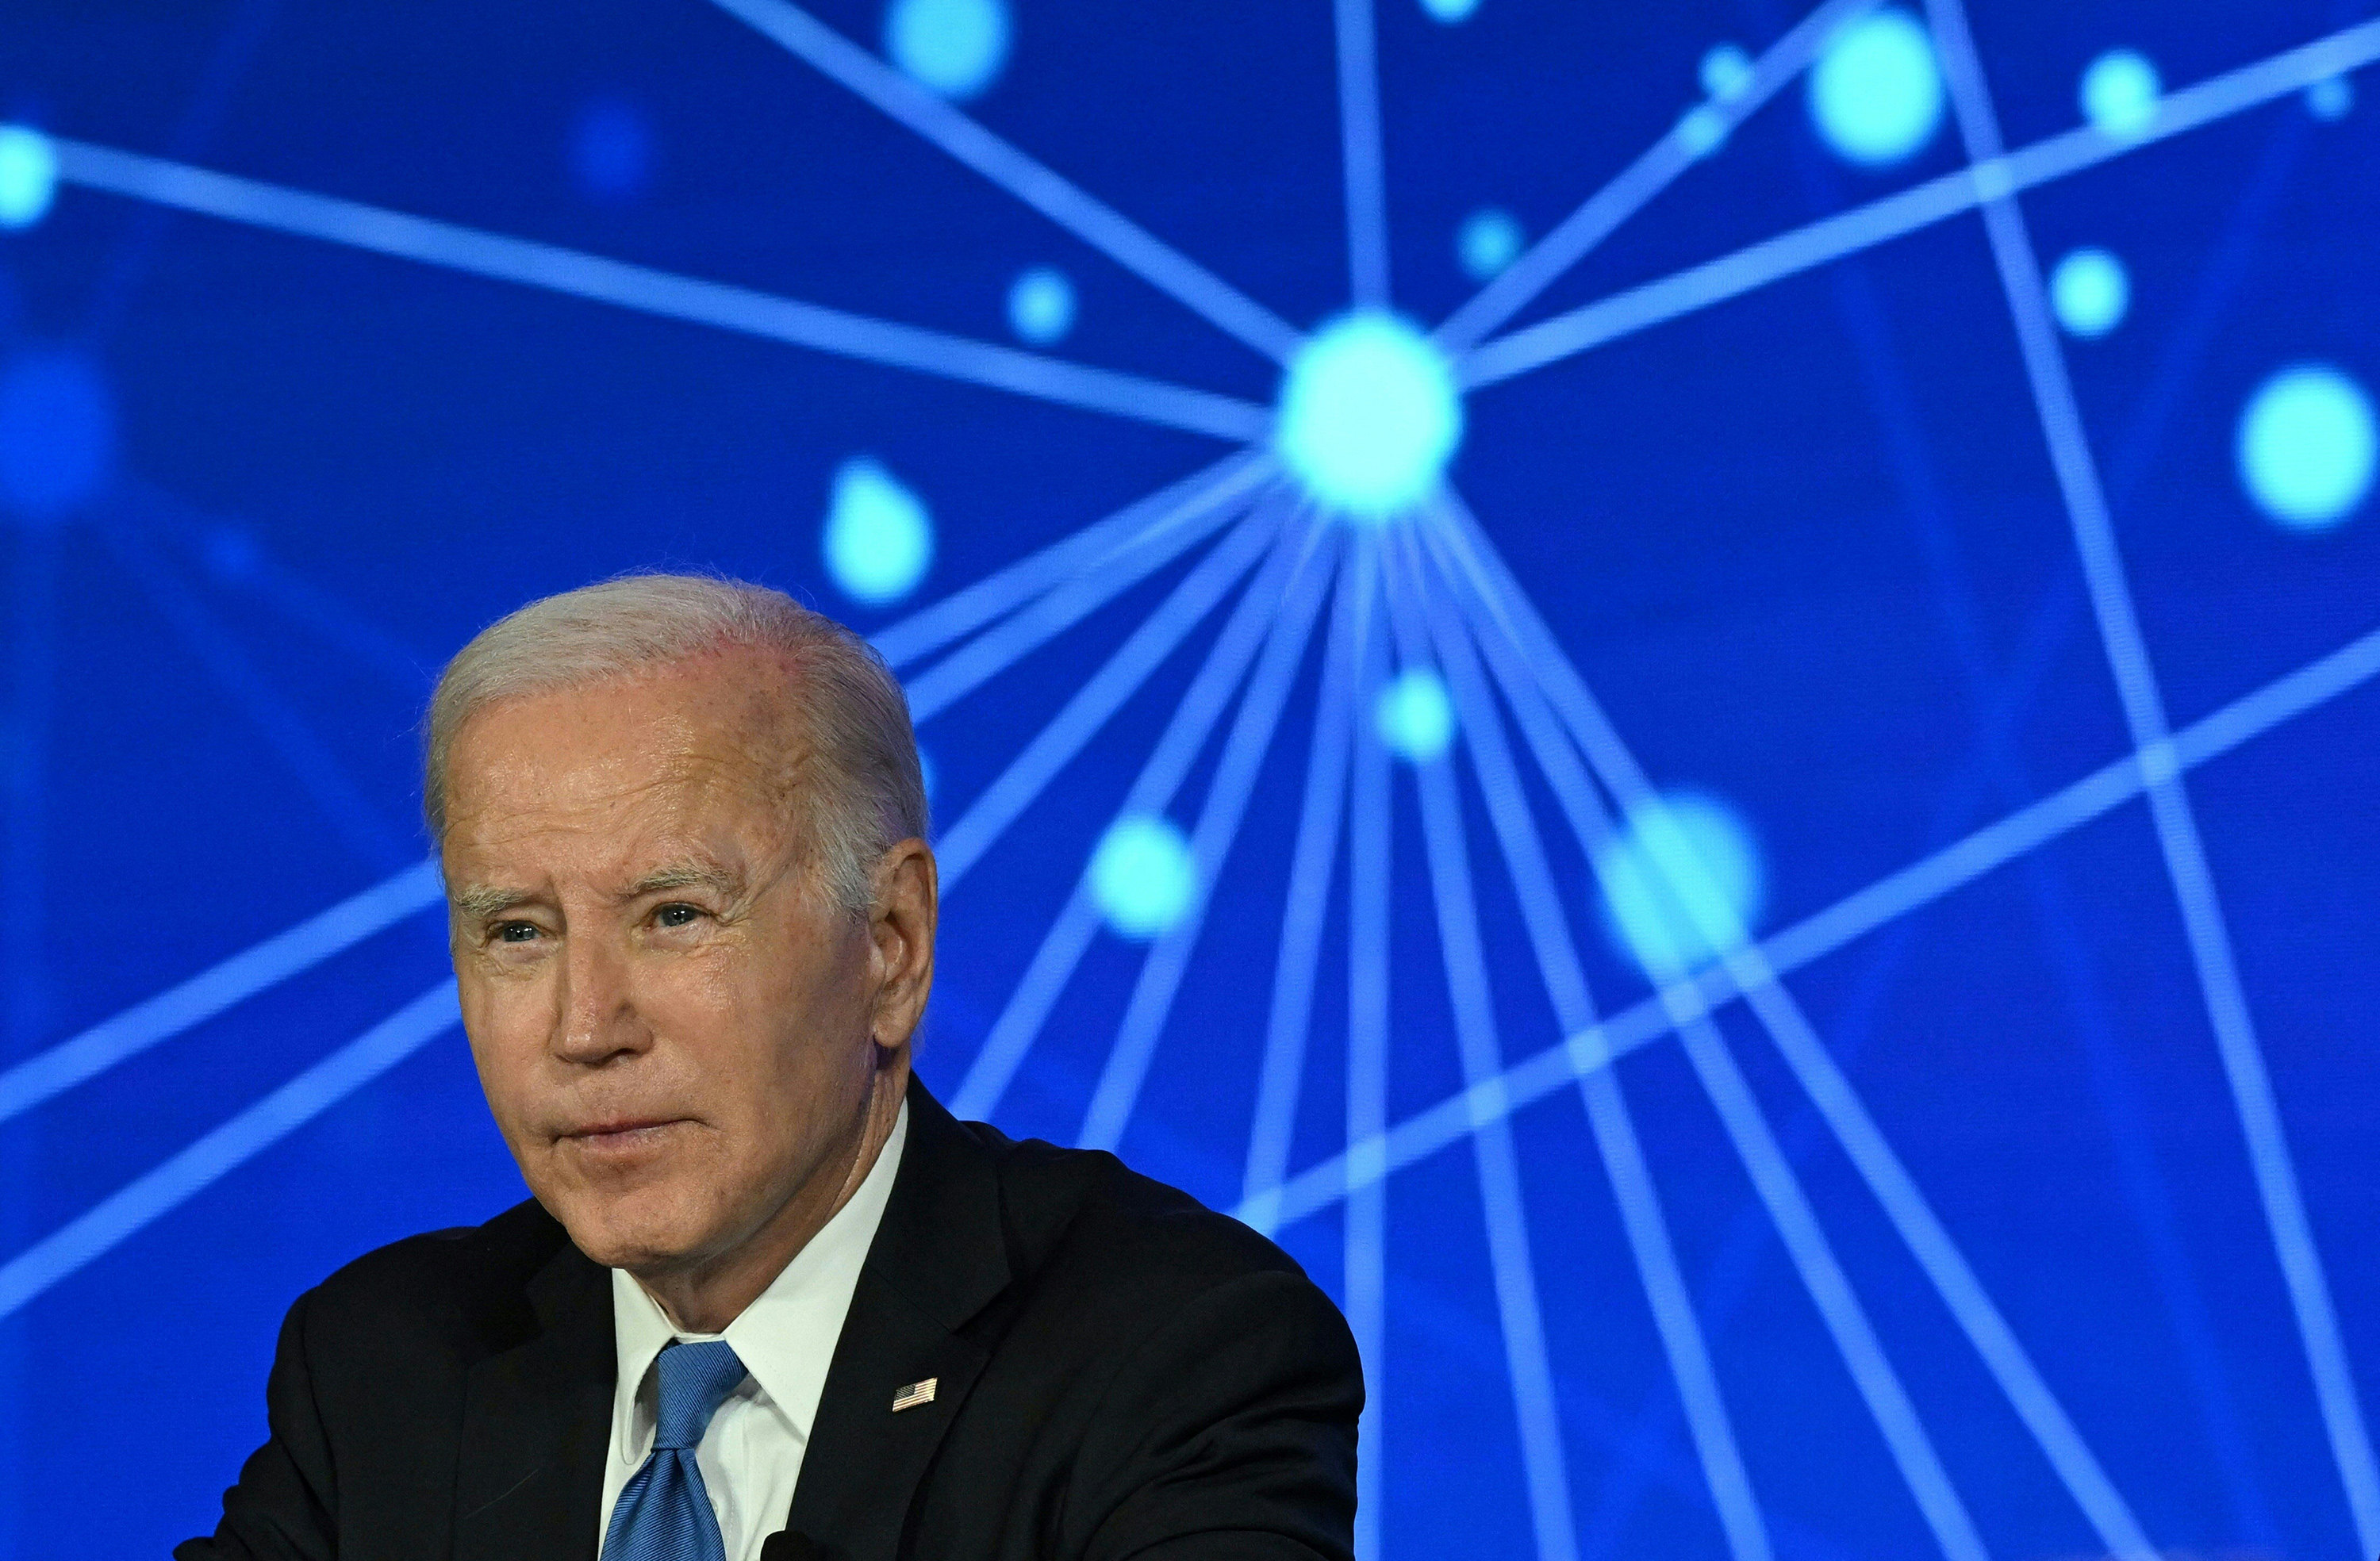 US President Joe Biden is set to sign an executive order governing the use of AI by federal agencies. Photo: AFP/Getty Images/TNS